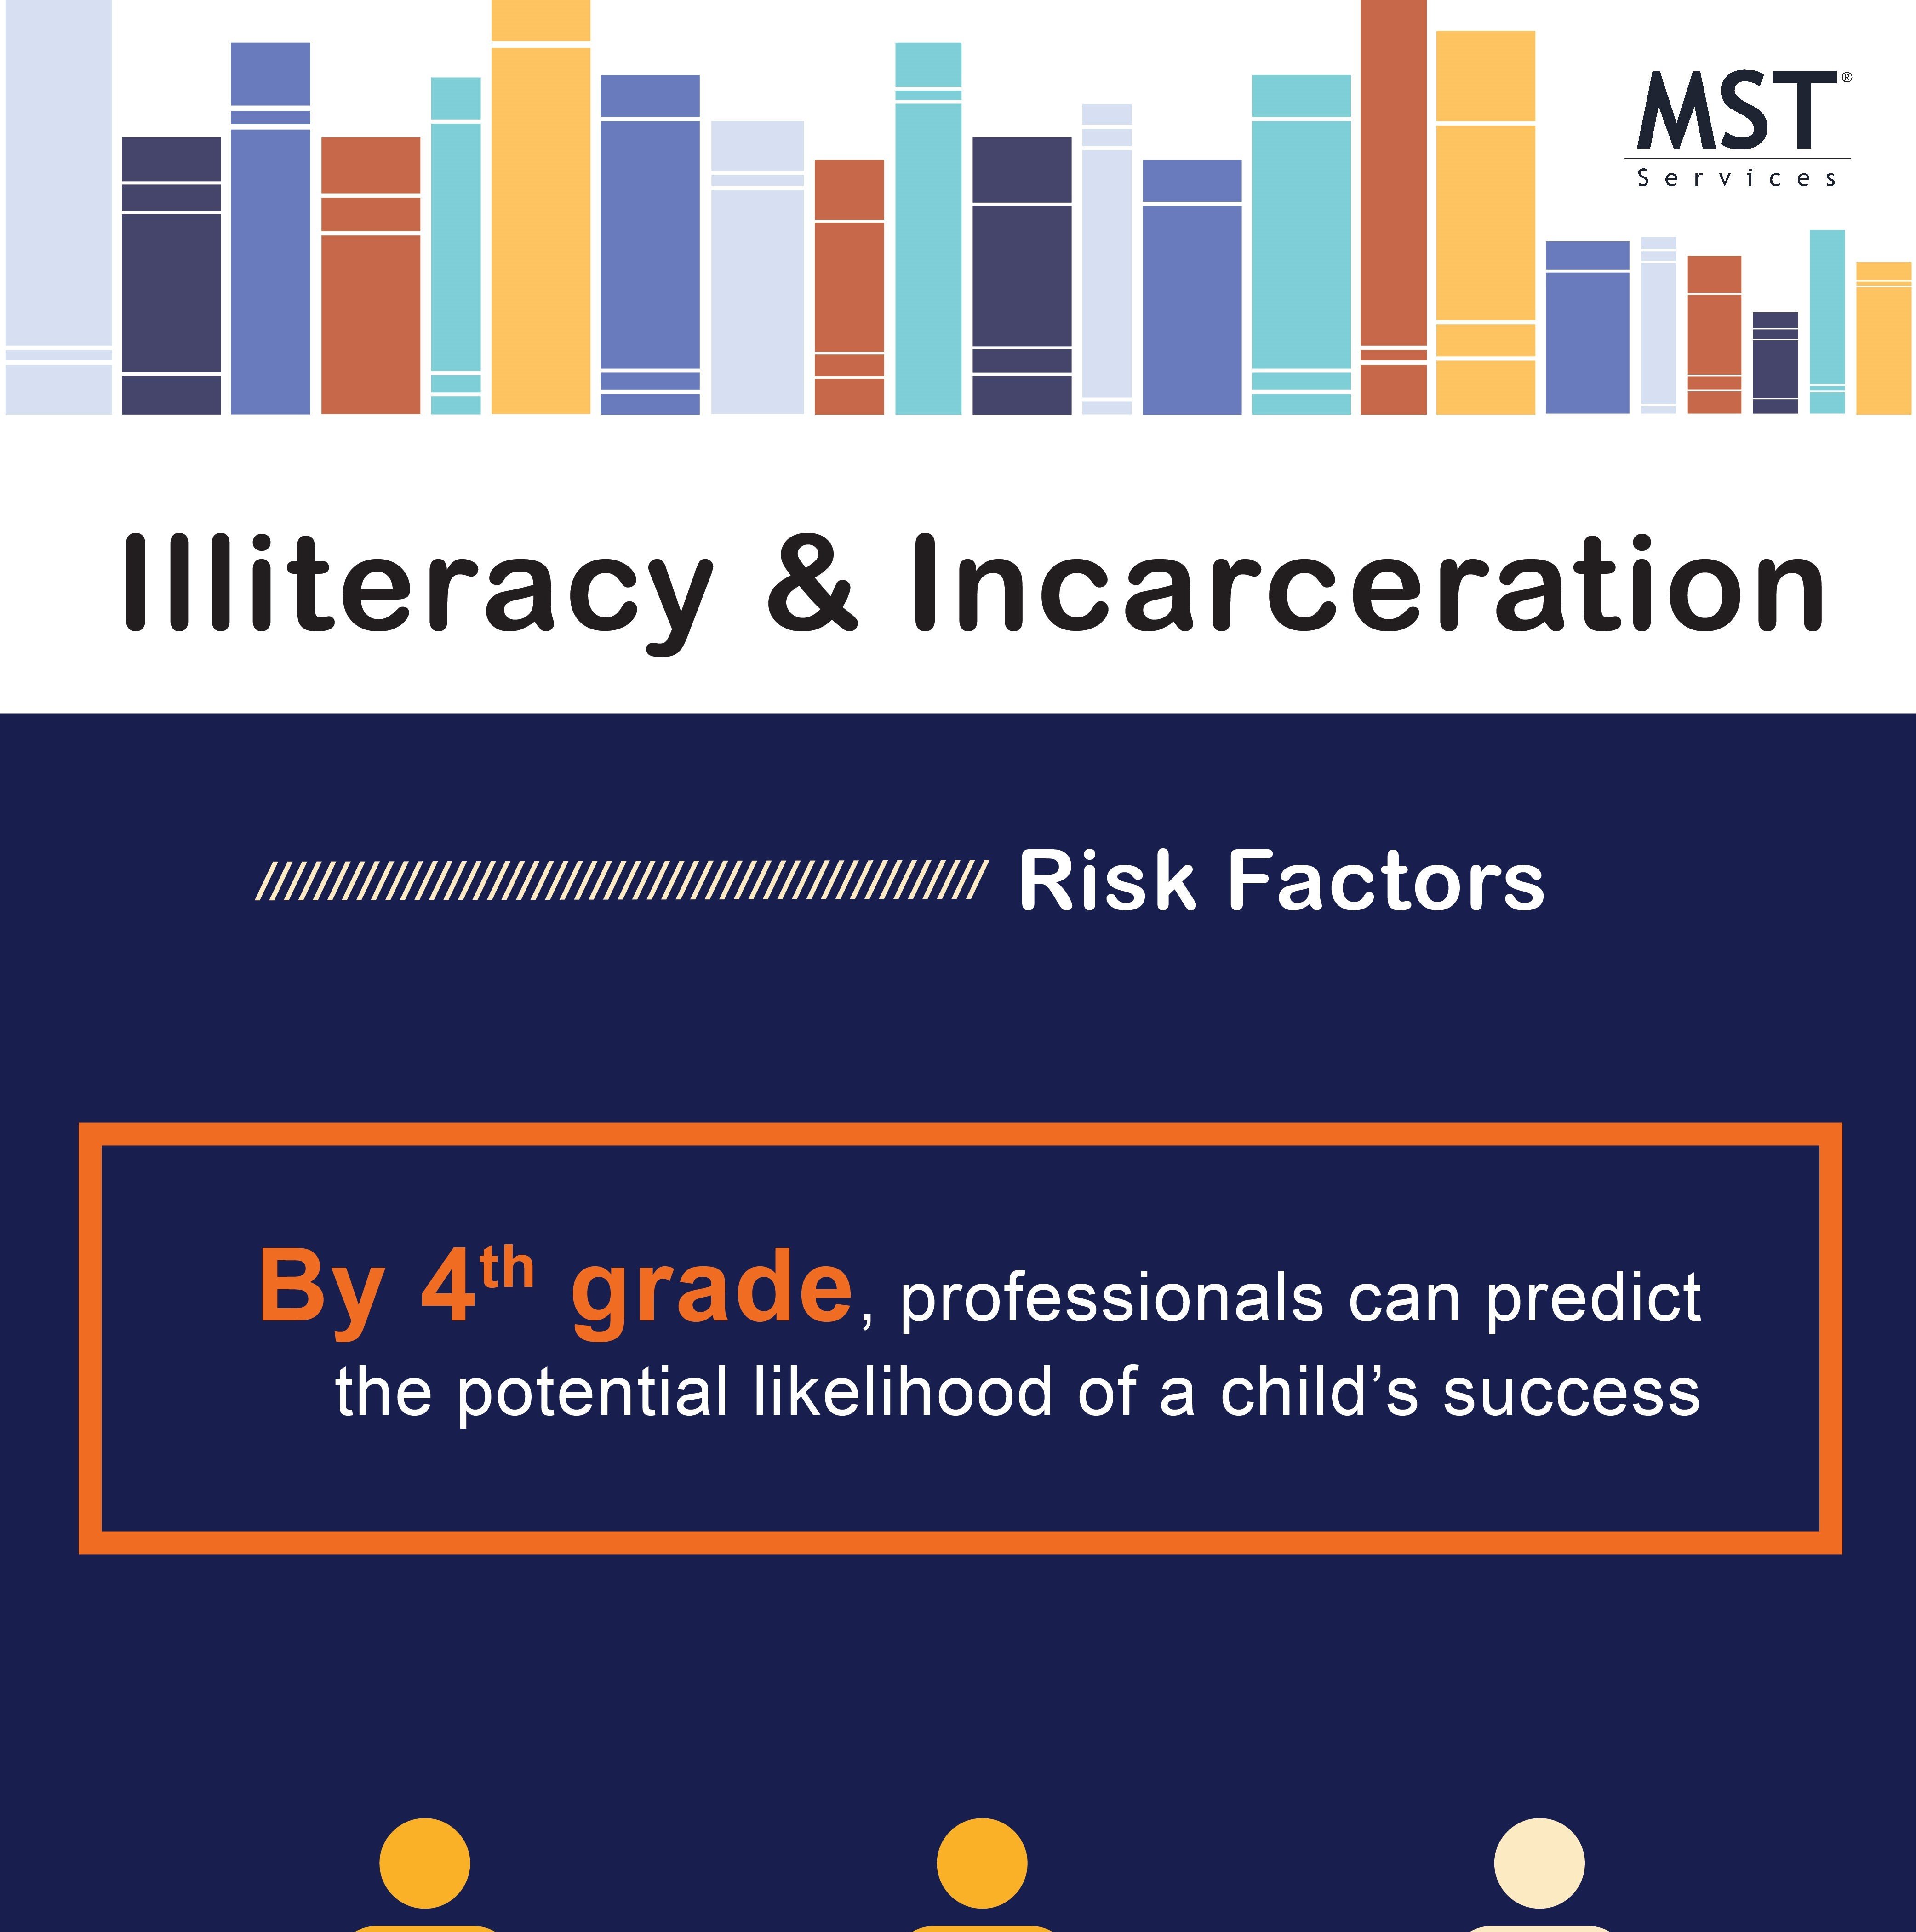 Illiteracy and Incarceration Infographic